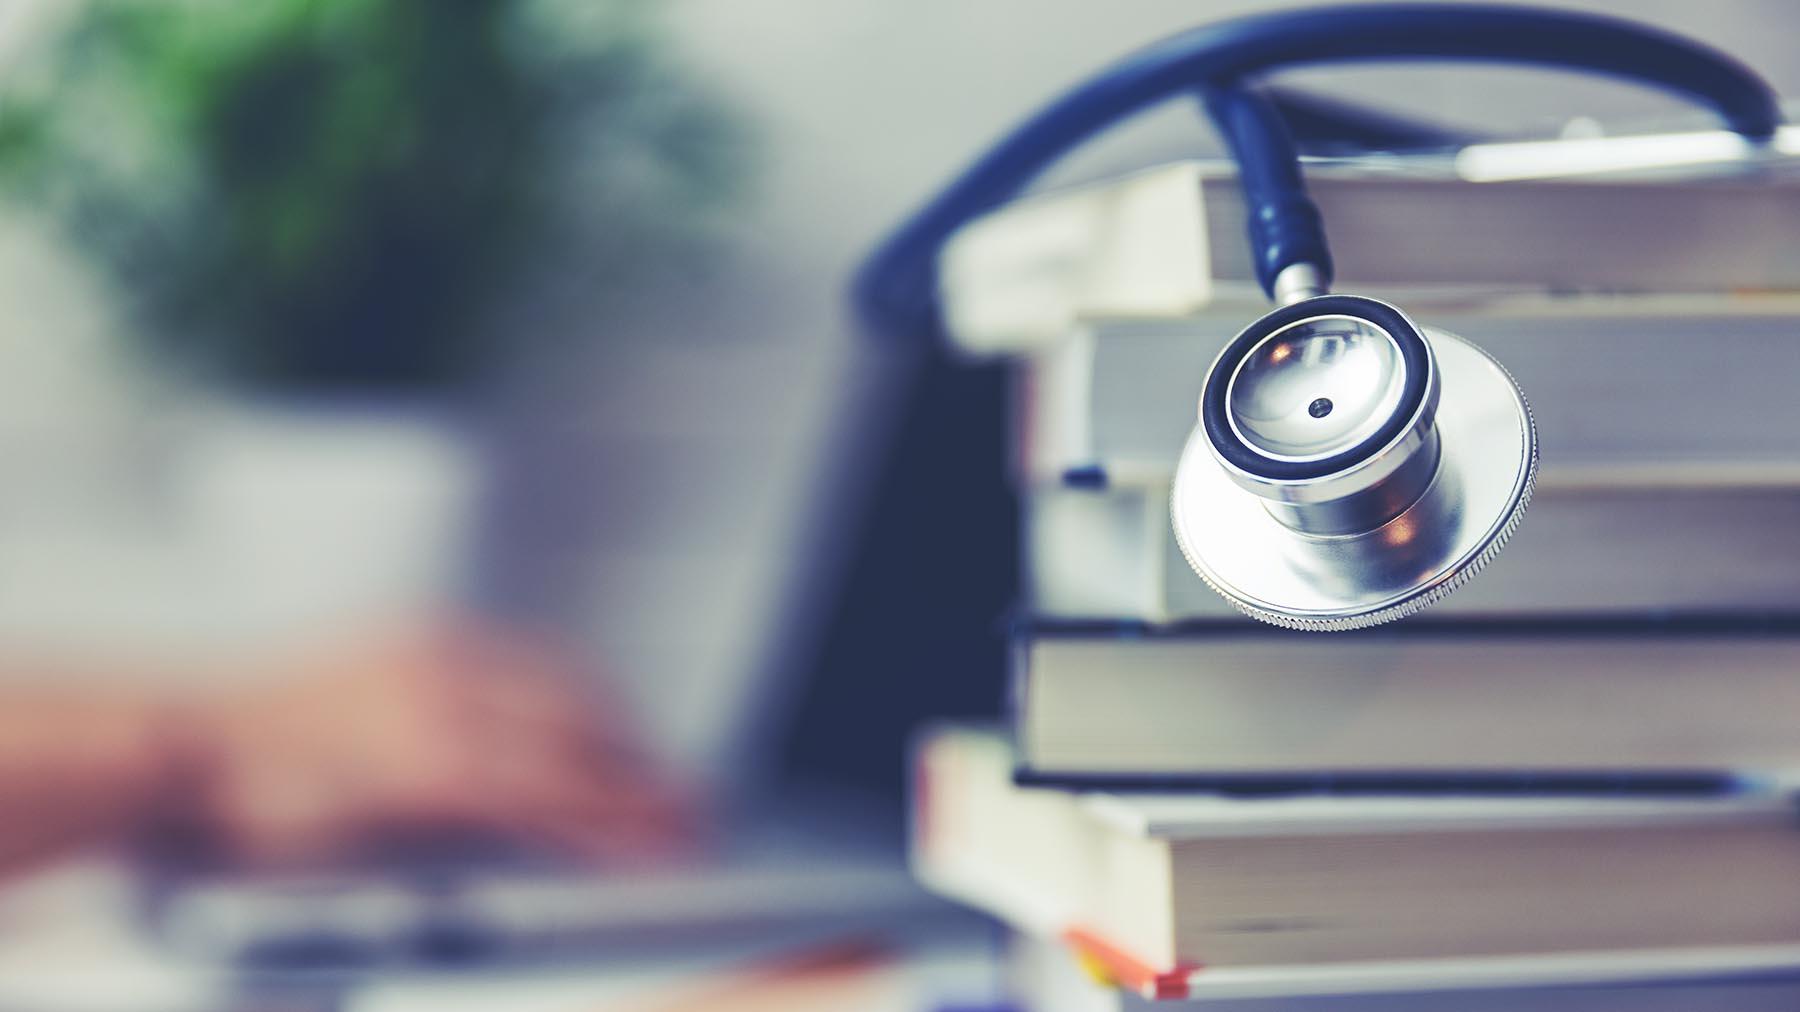 A stethoscope on a stack of books